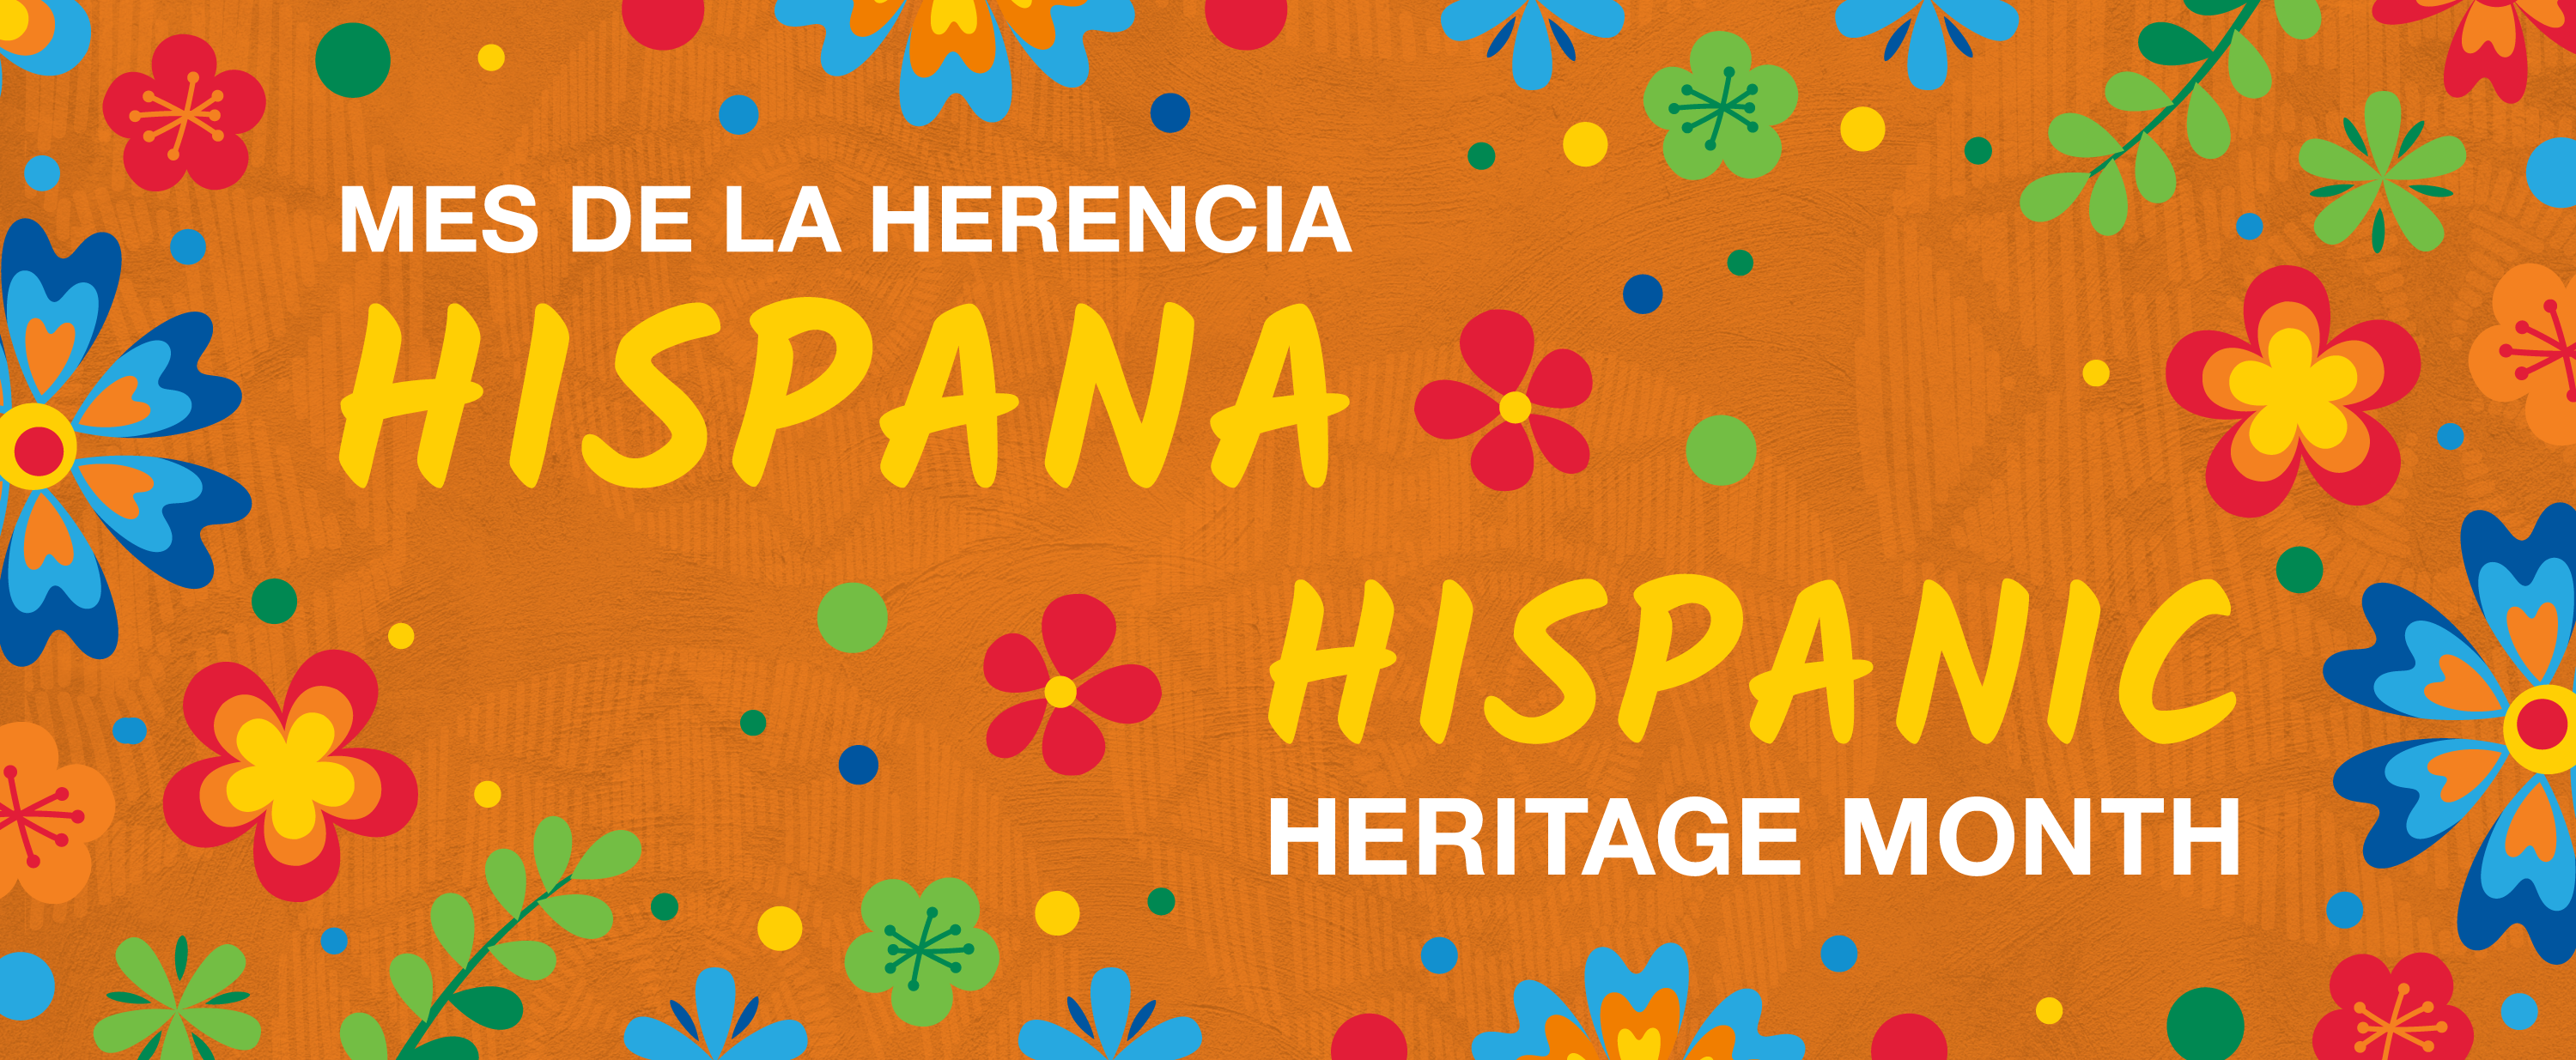 Hispanic Heritage Month 2022  Office of Equity, Diversity, and